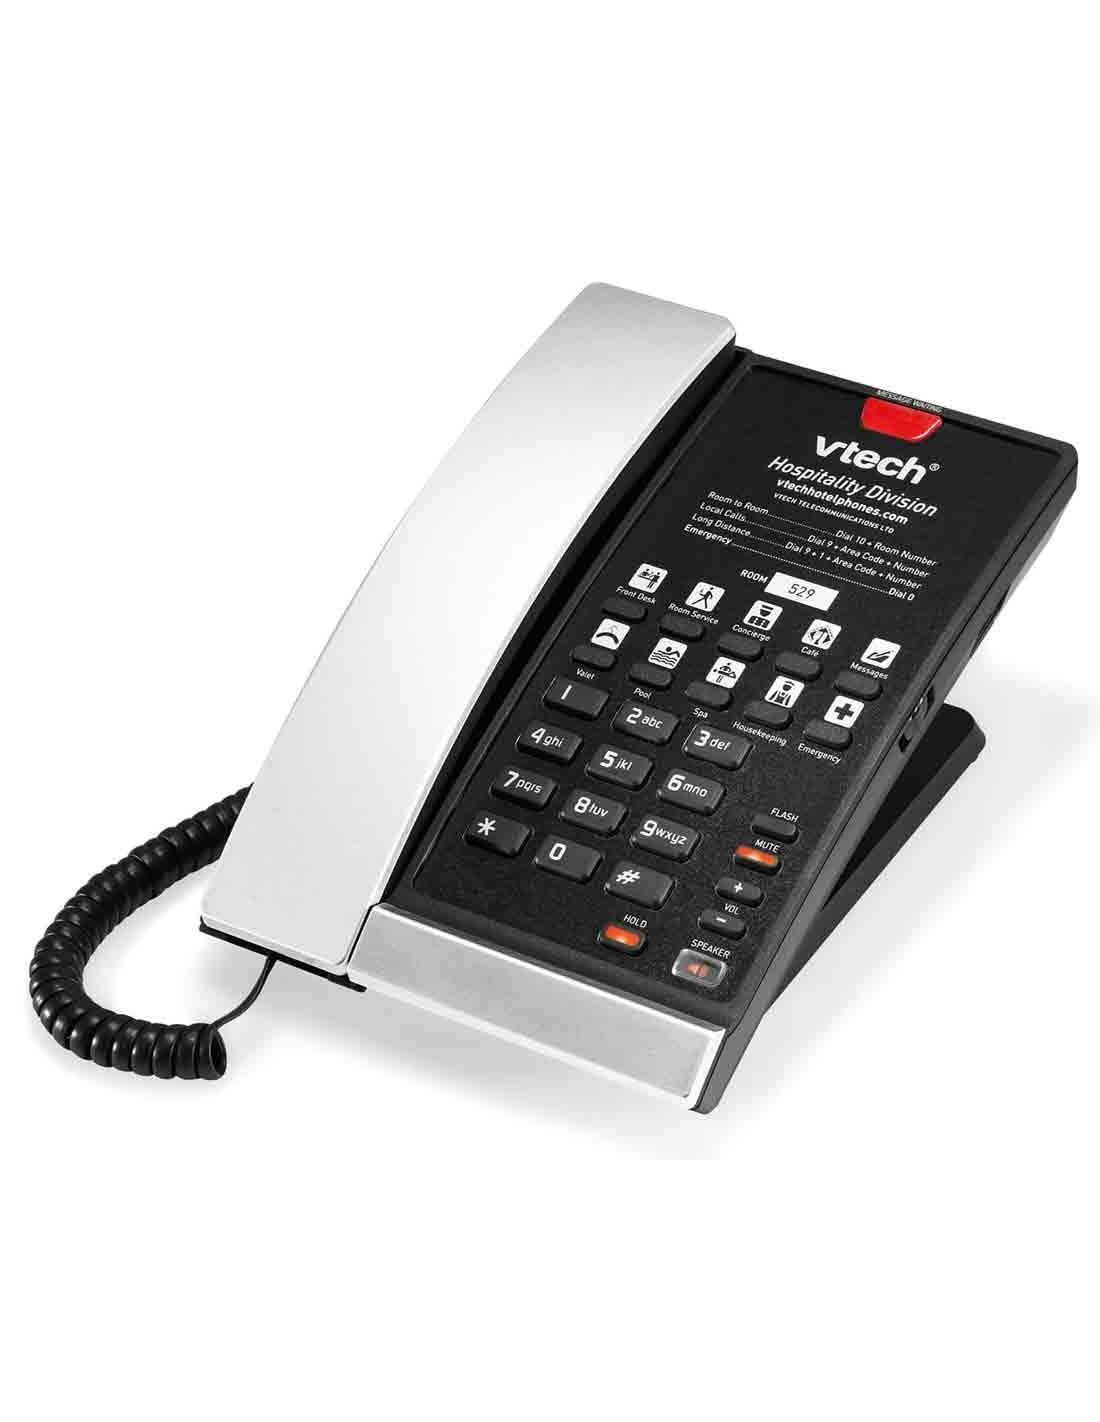 VTech A2210-NS Silver & Black Analog Corded Phone for Guest Room in Dubai UAE